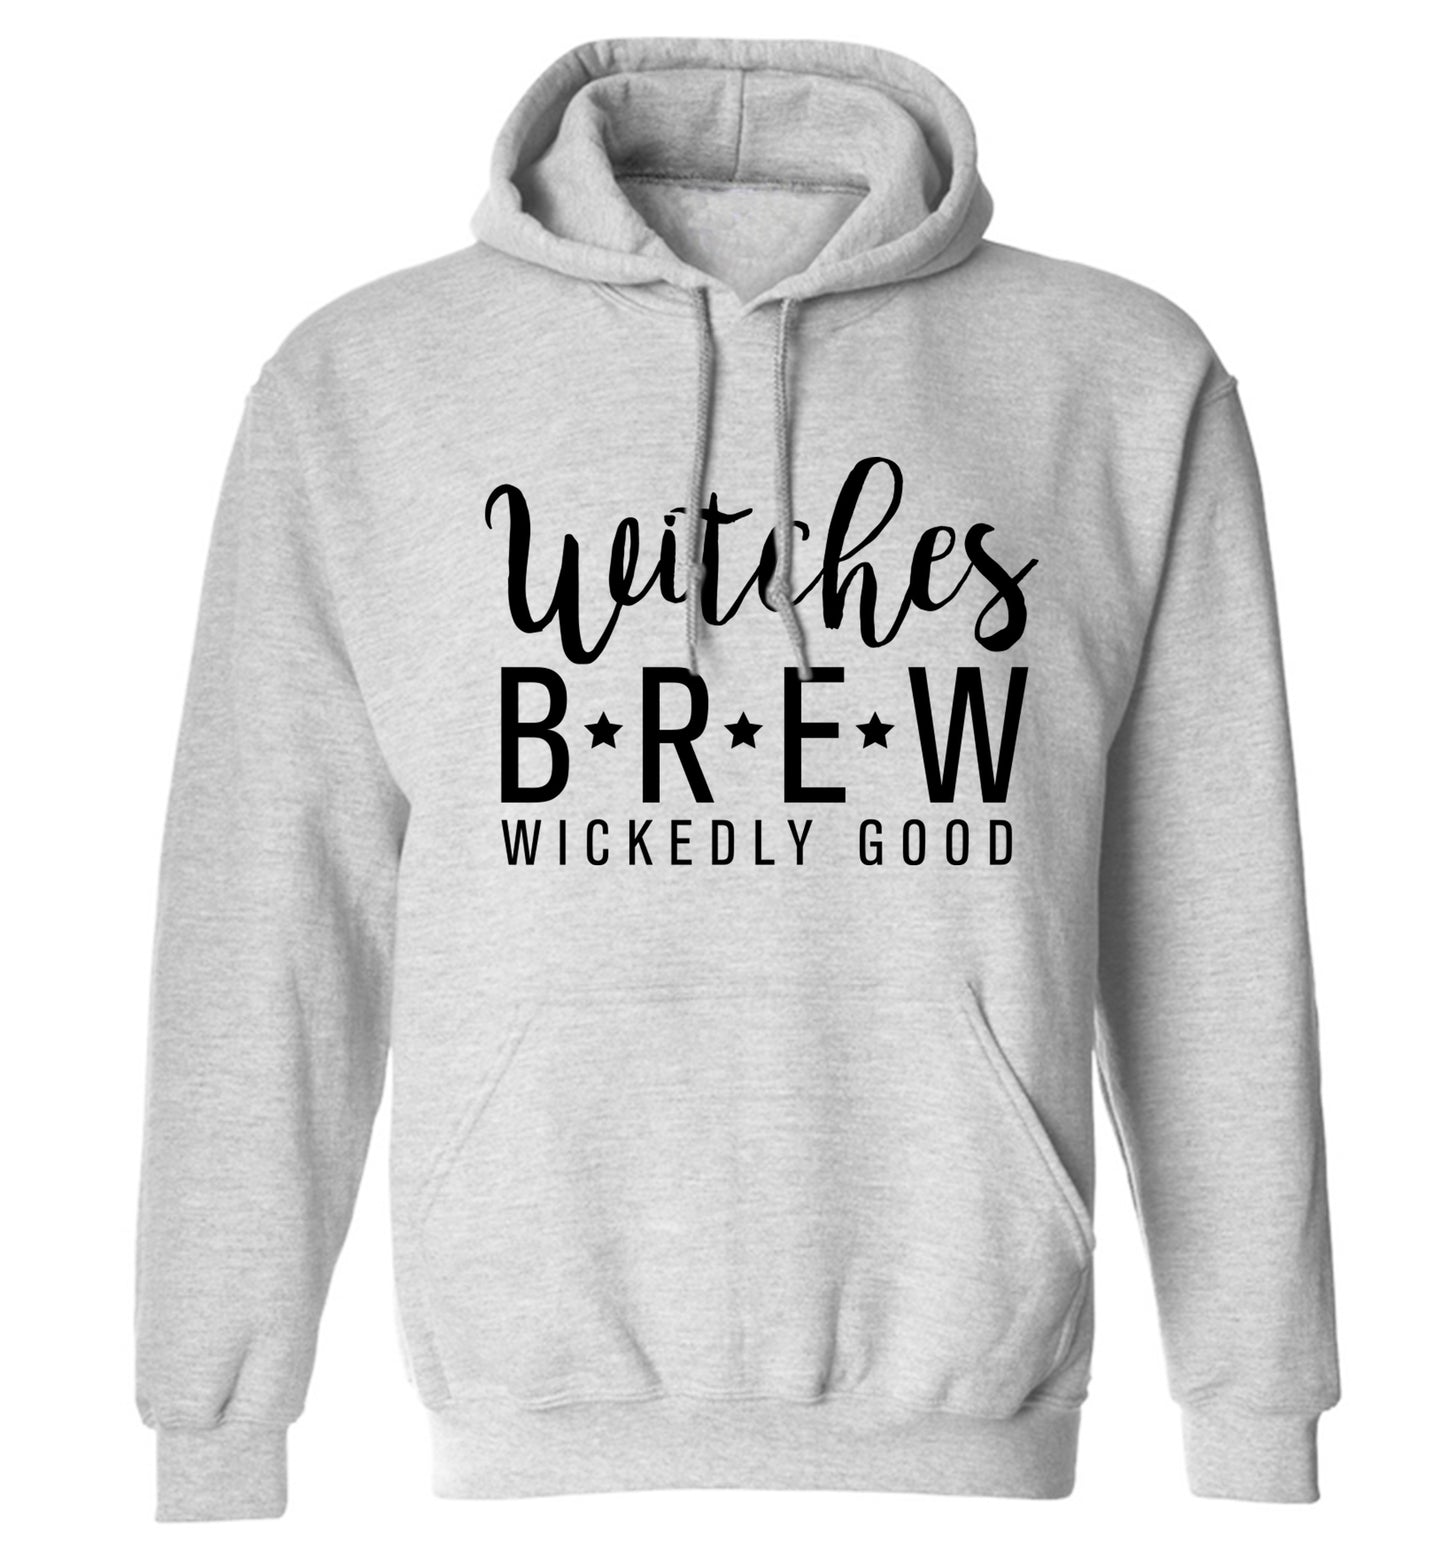 Witches Brew wickedly good adults unisex grey hoodie 2XL